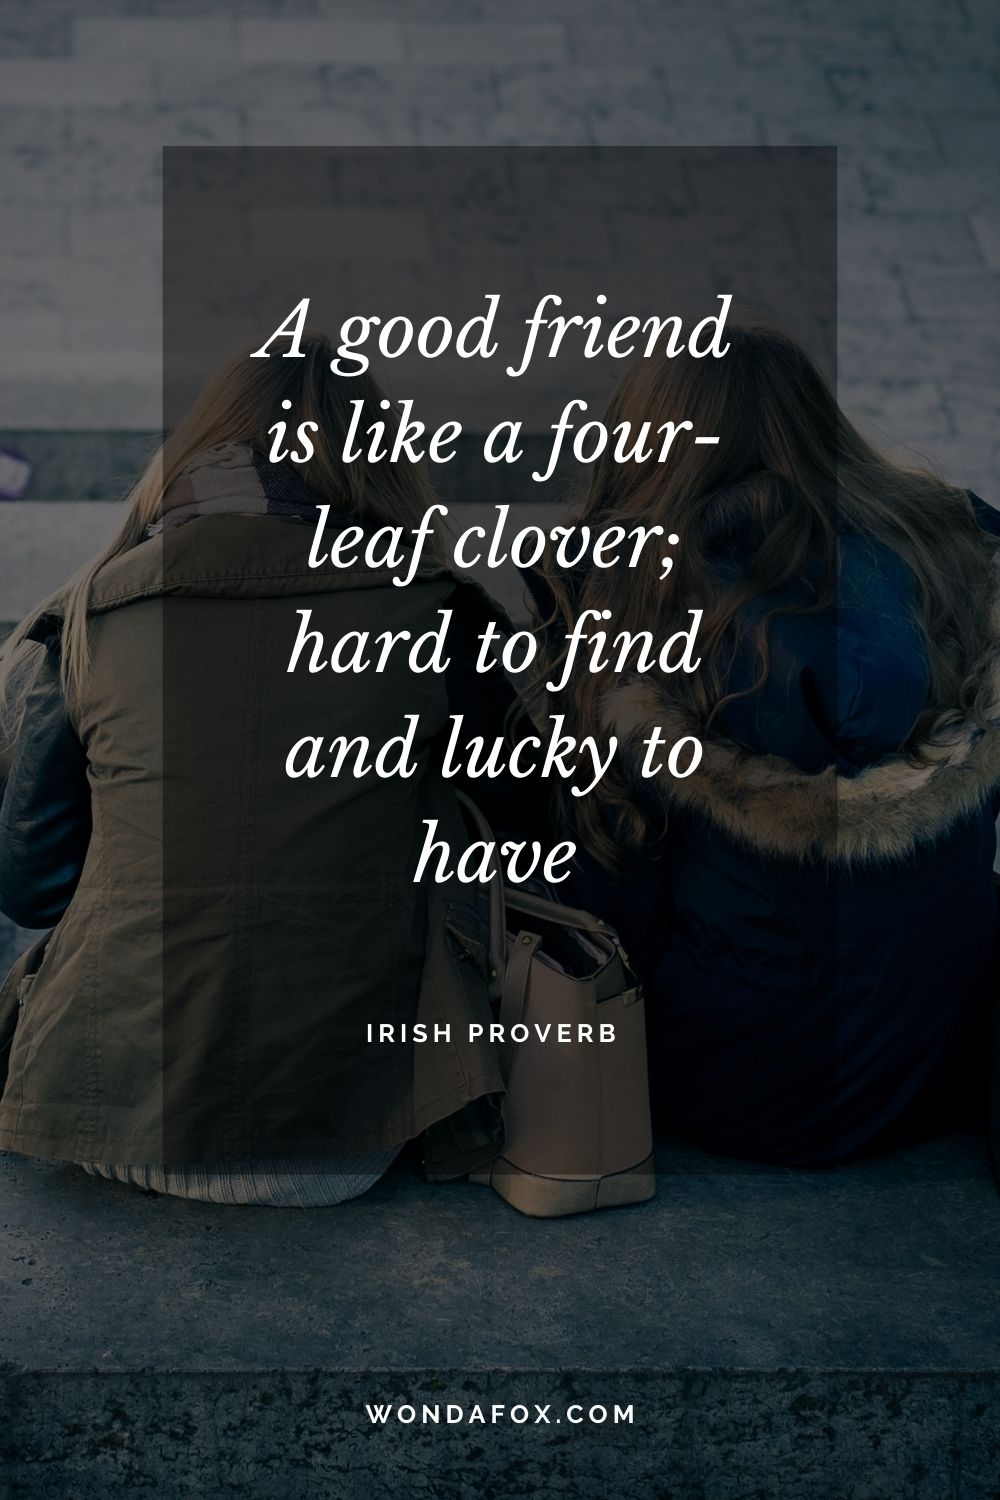 A good friend is like a four-leaf clover; hard to find and lucky to have